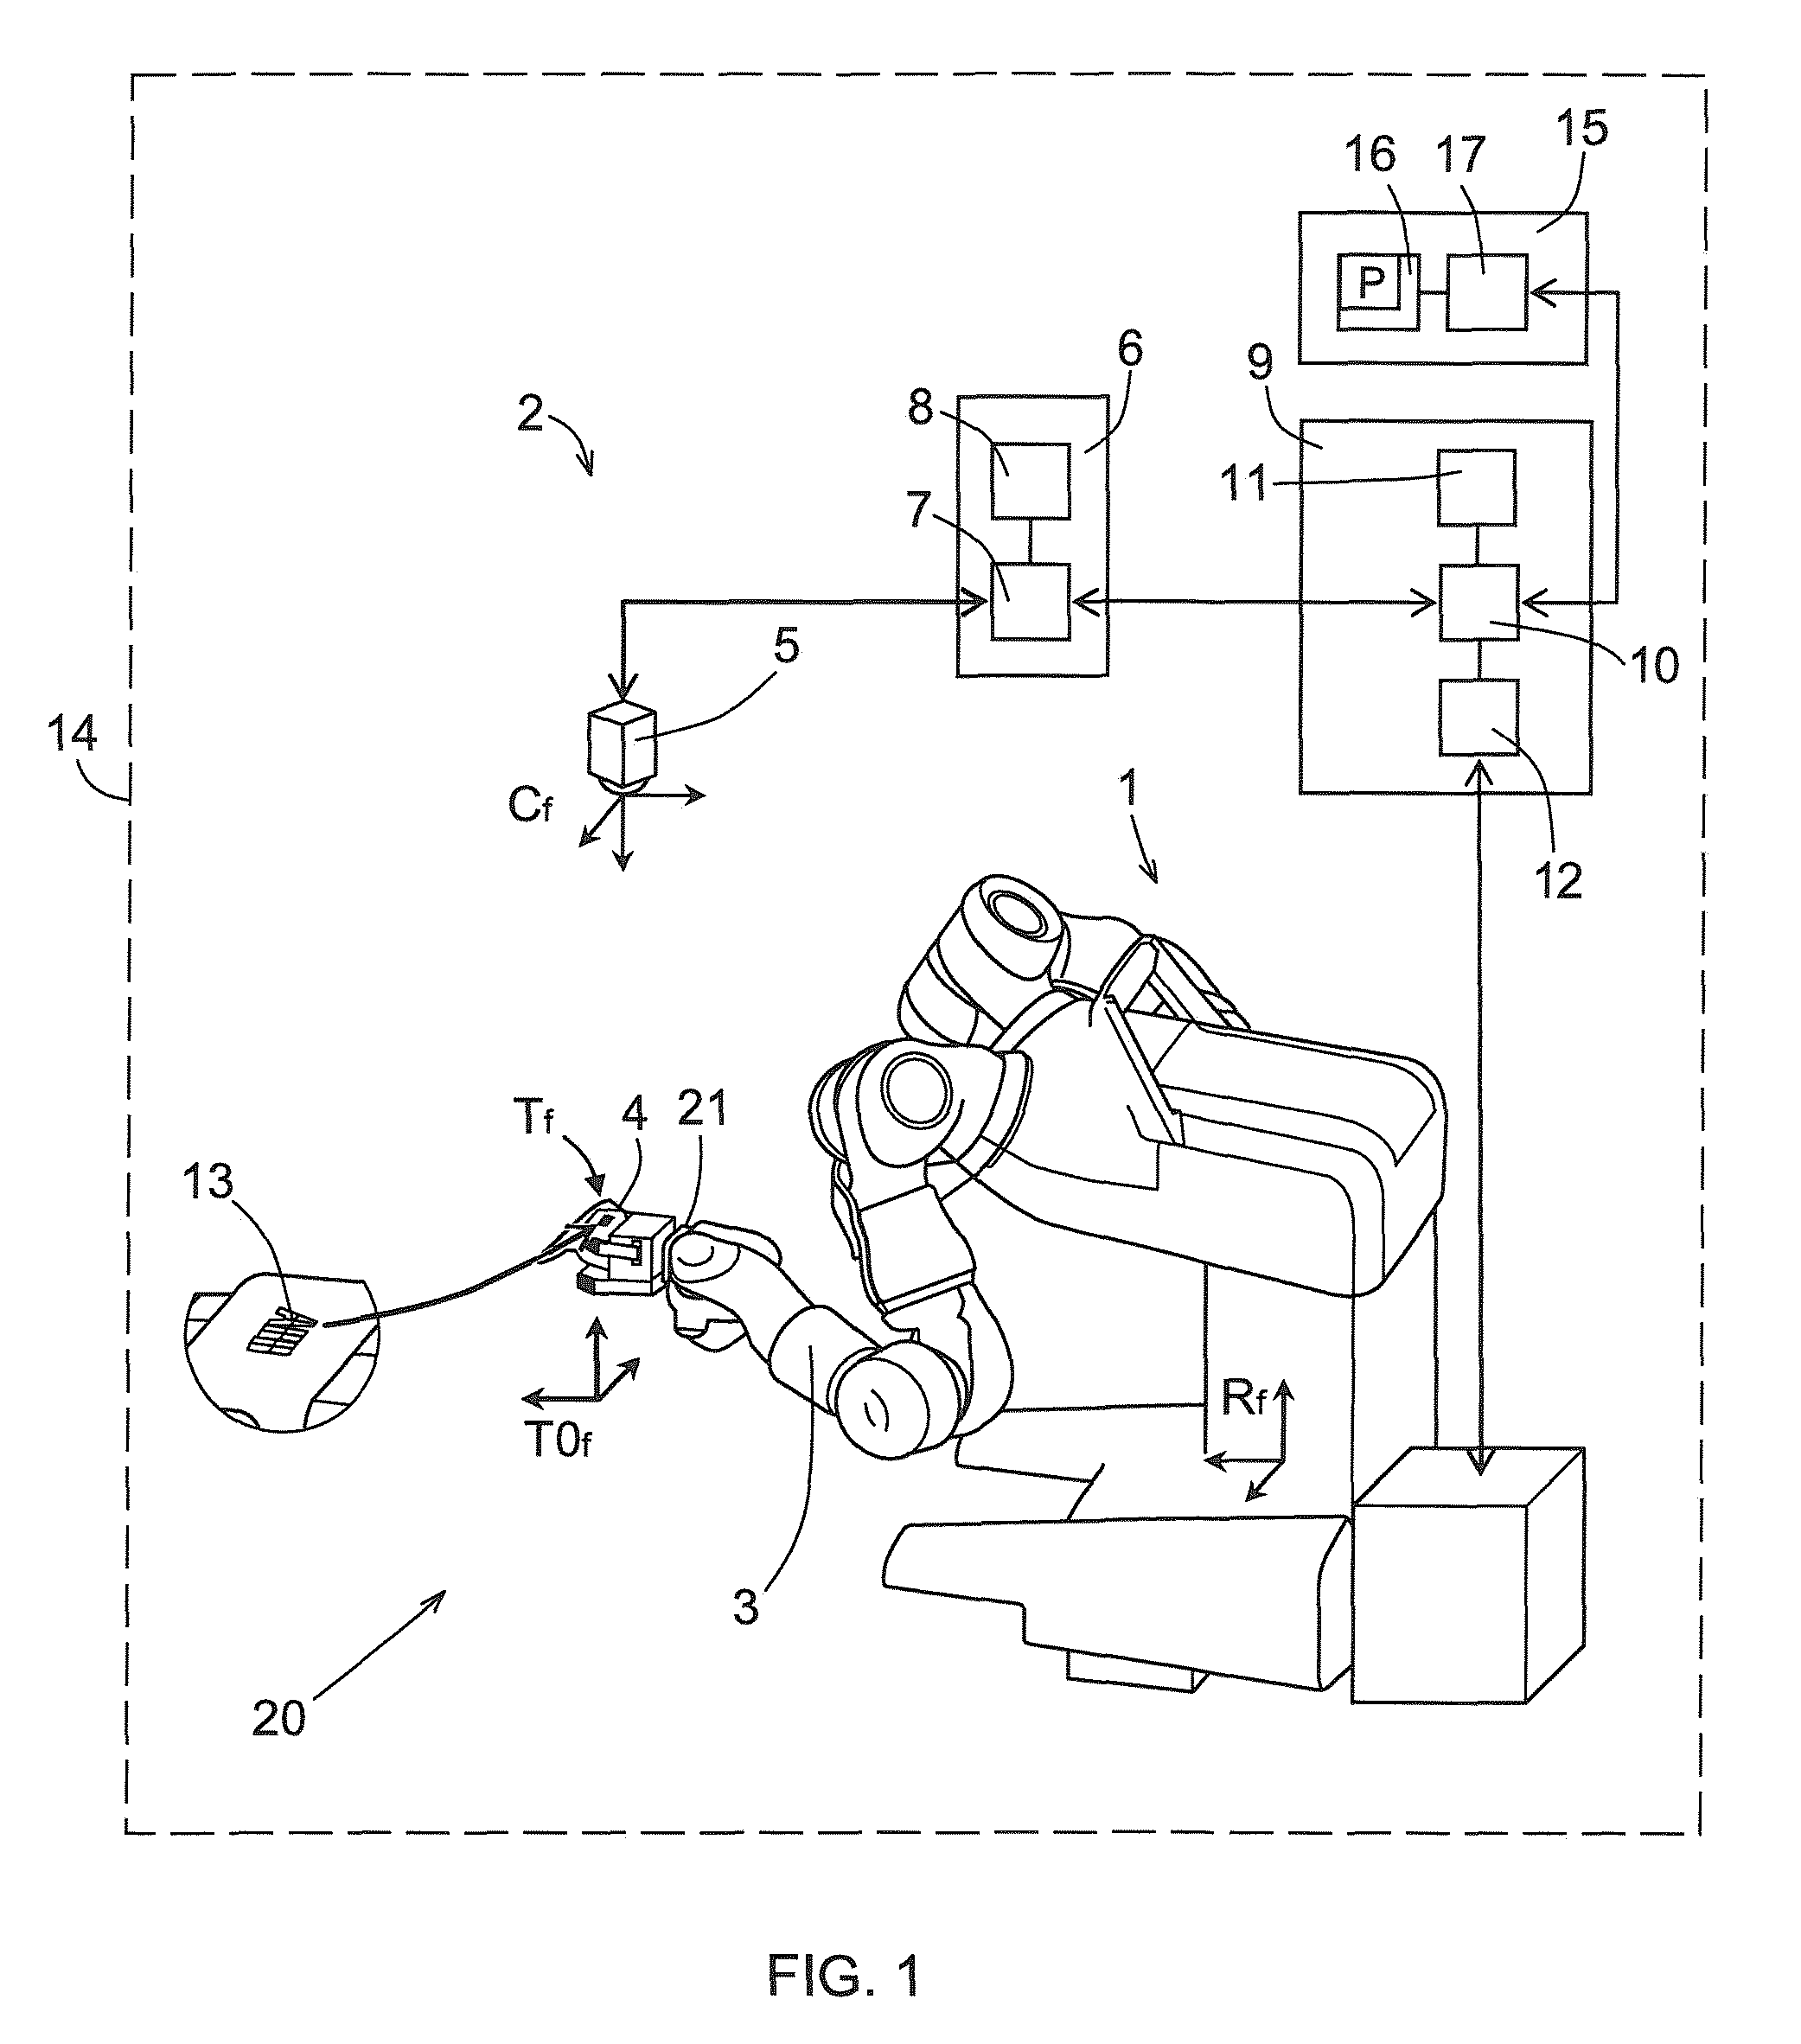 Robot system and method for calibration